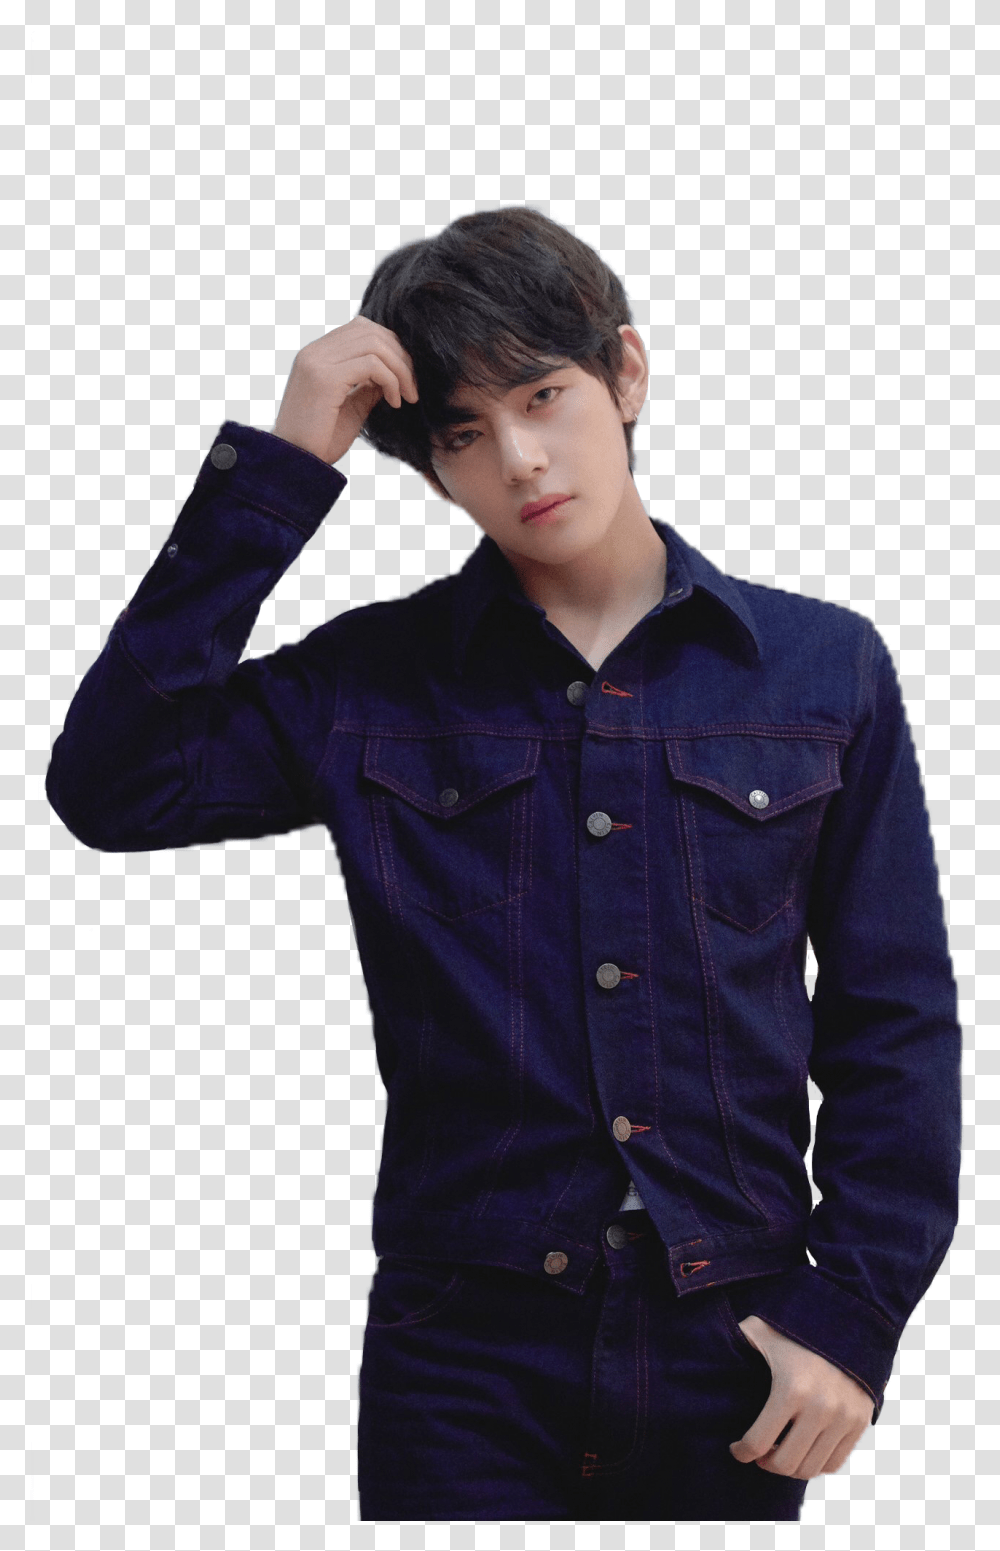 V Love Yourself Tear Photoshoot Bts Love Yourself Tear Concept, Clothing, Apparel, Shirt, Sleeve Transparent Png